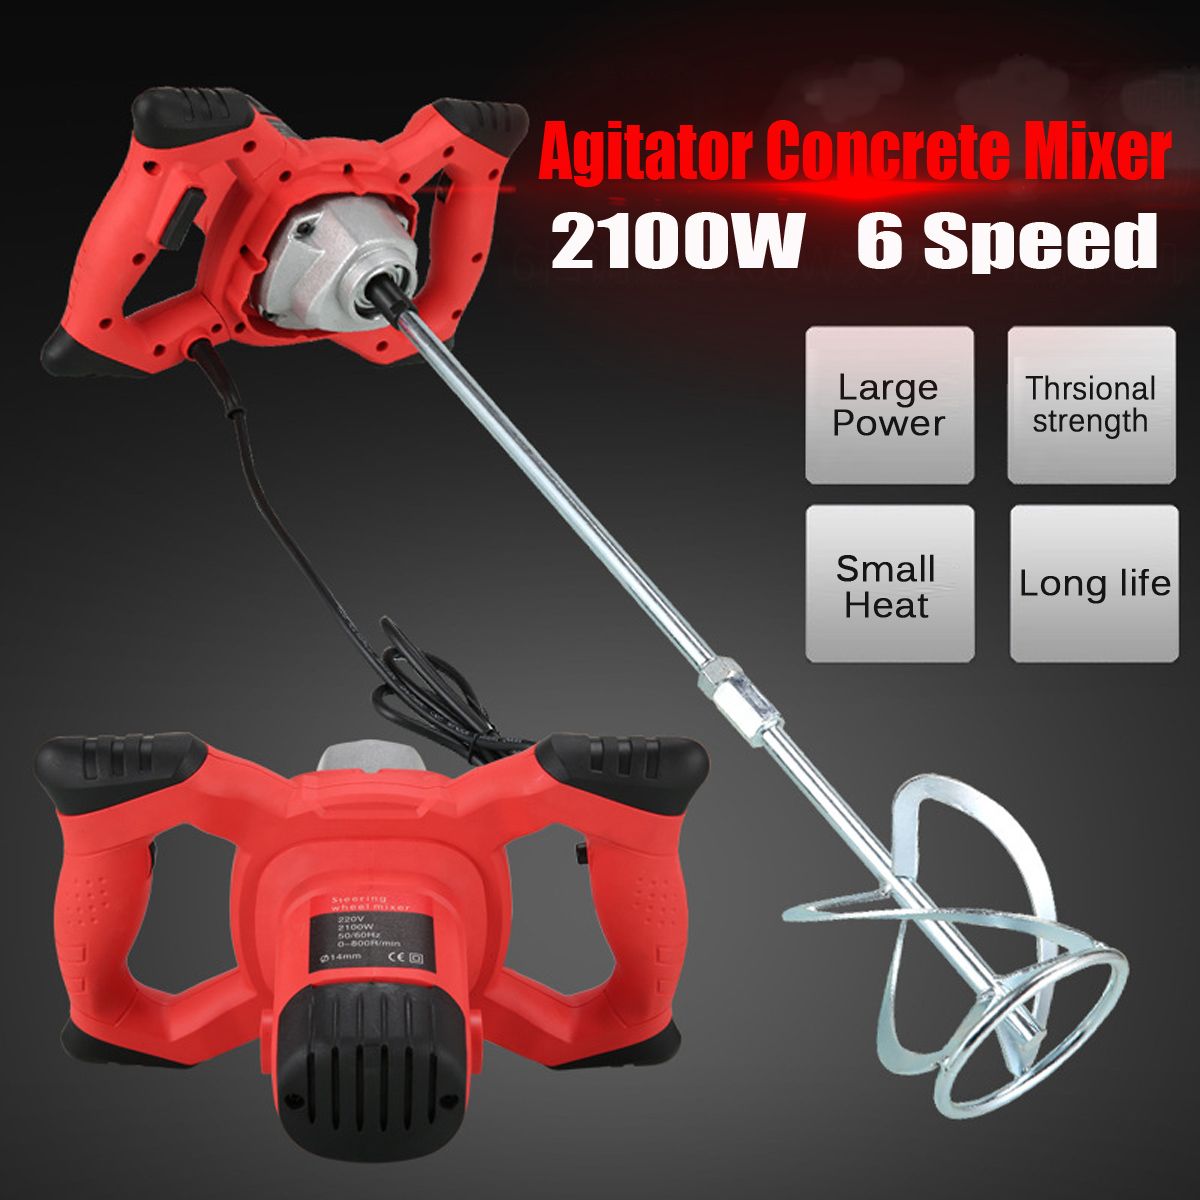 Cement-Mixer-Concrete-Grout-Painting-Hand-Power-Mixer-6-Speed-1697783